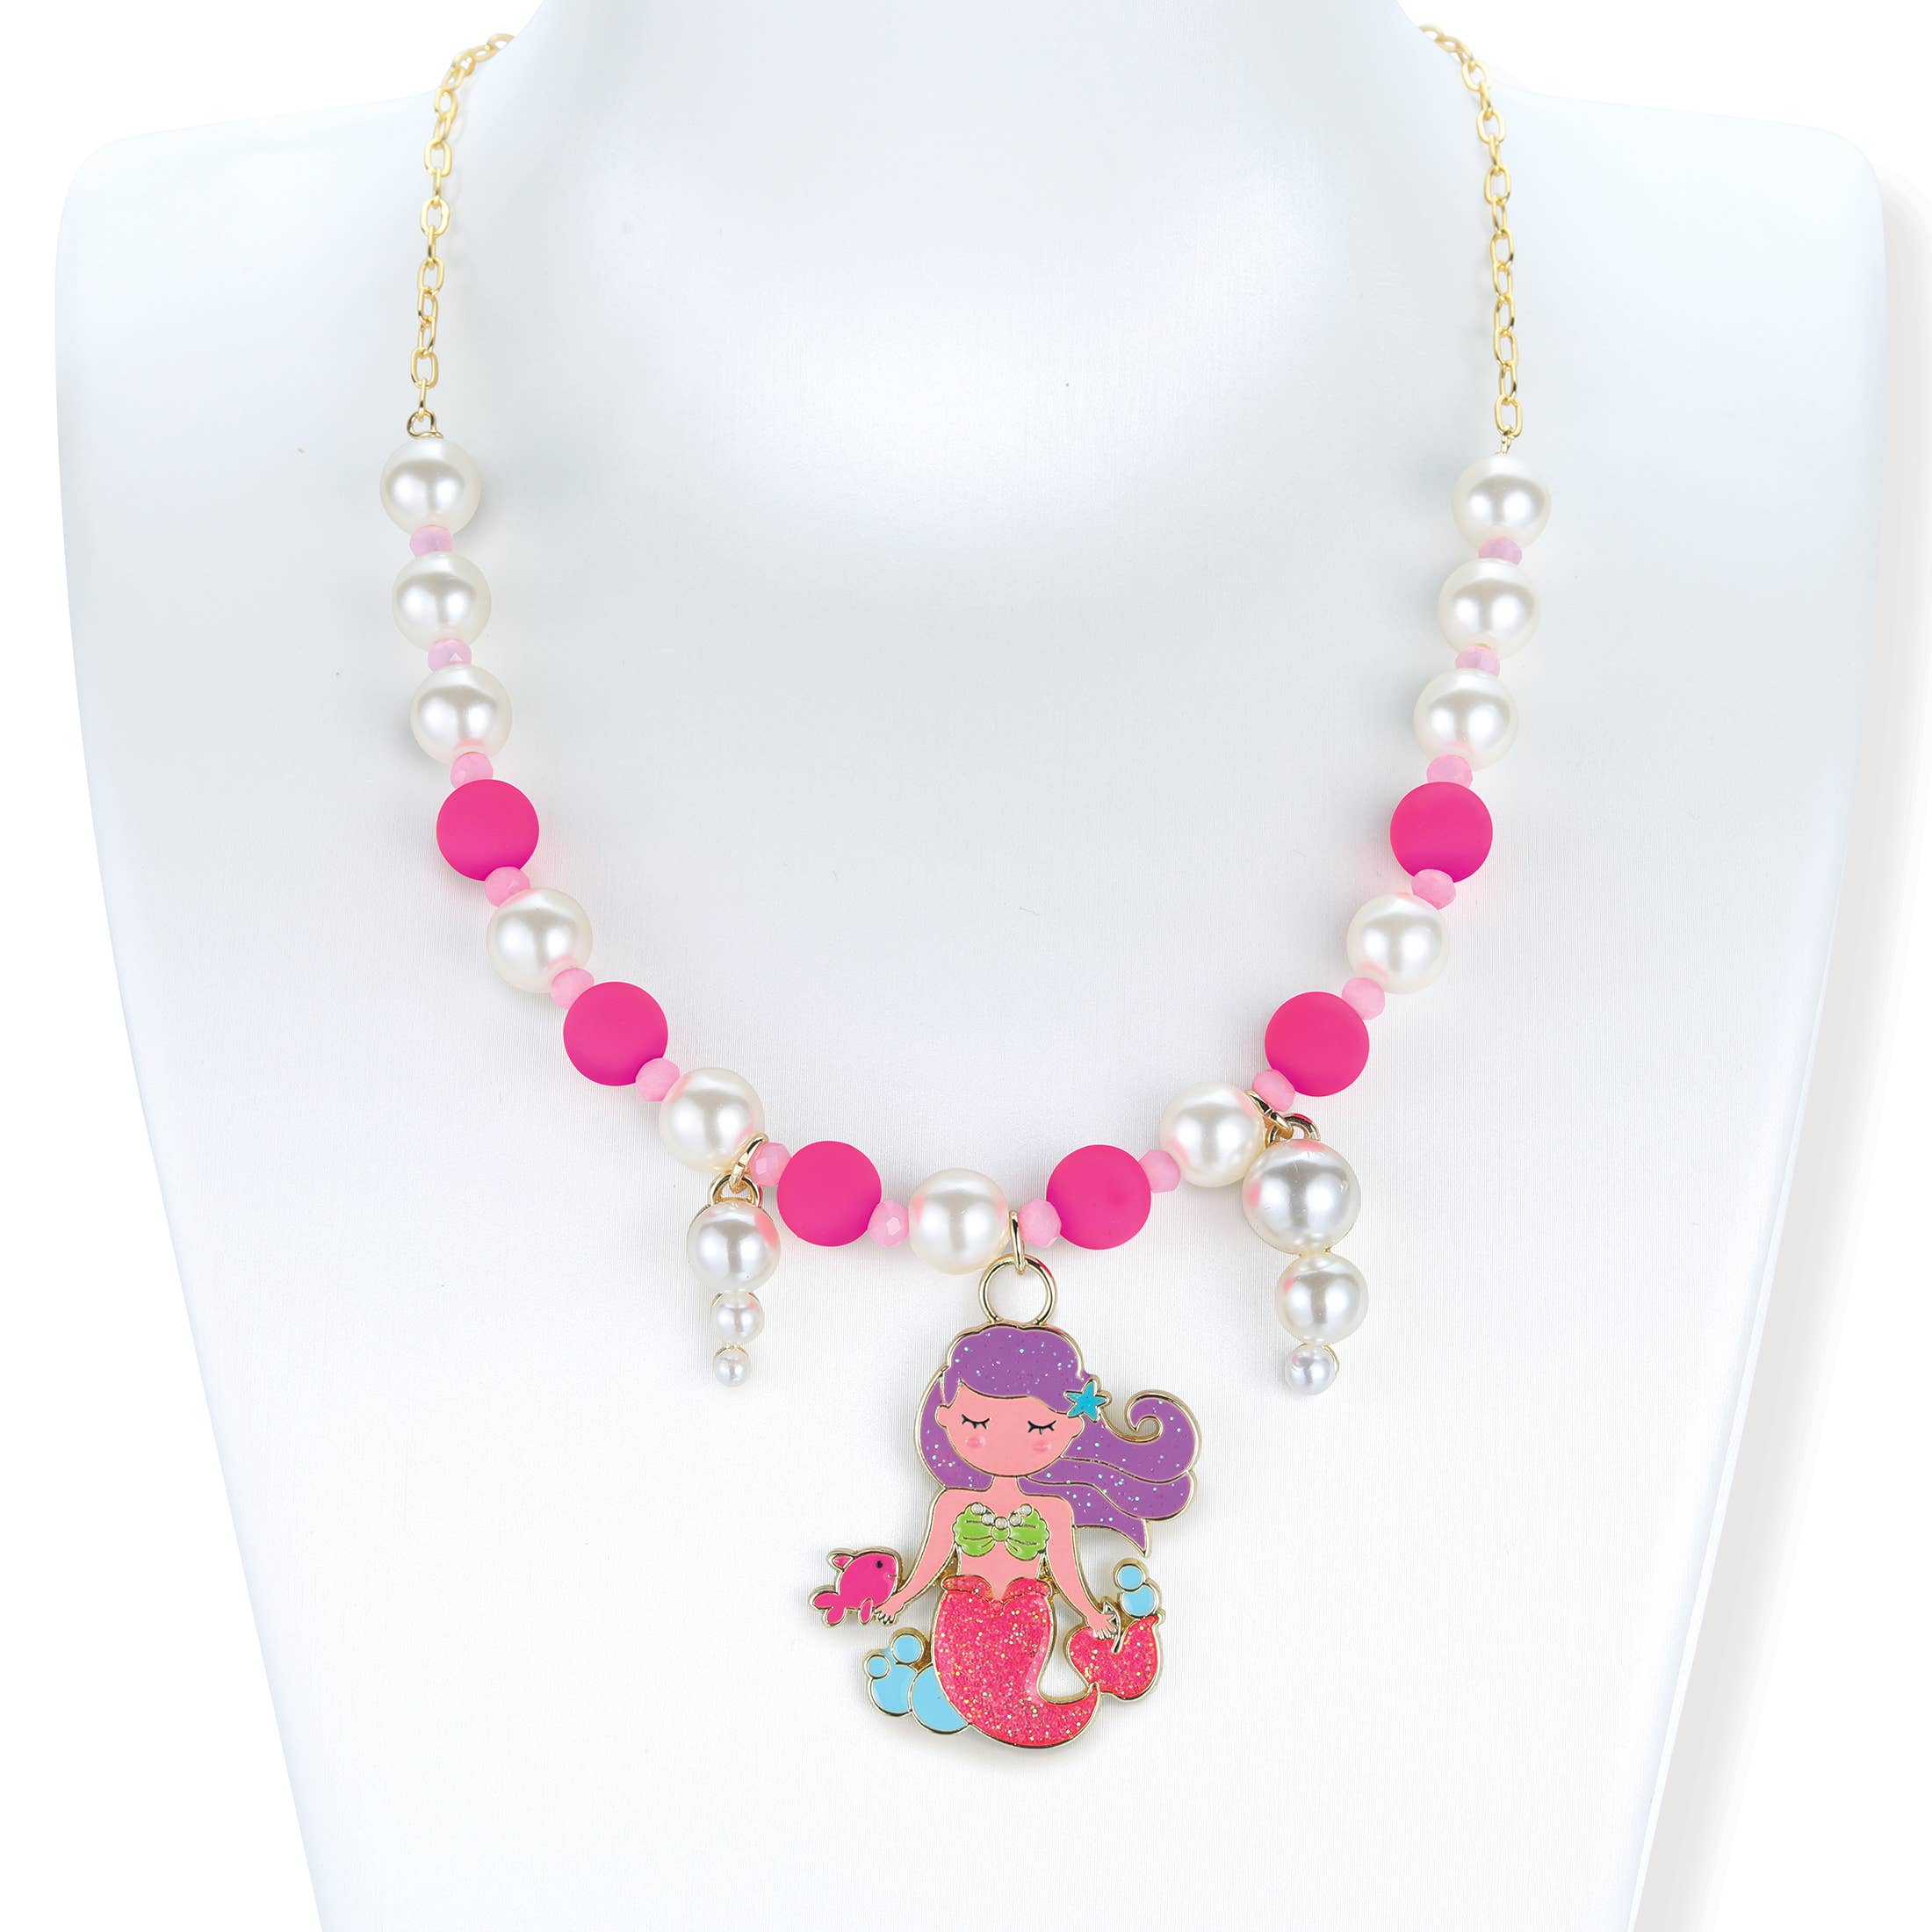 Mermaid Beads & Baubles Necklace